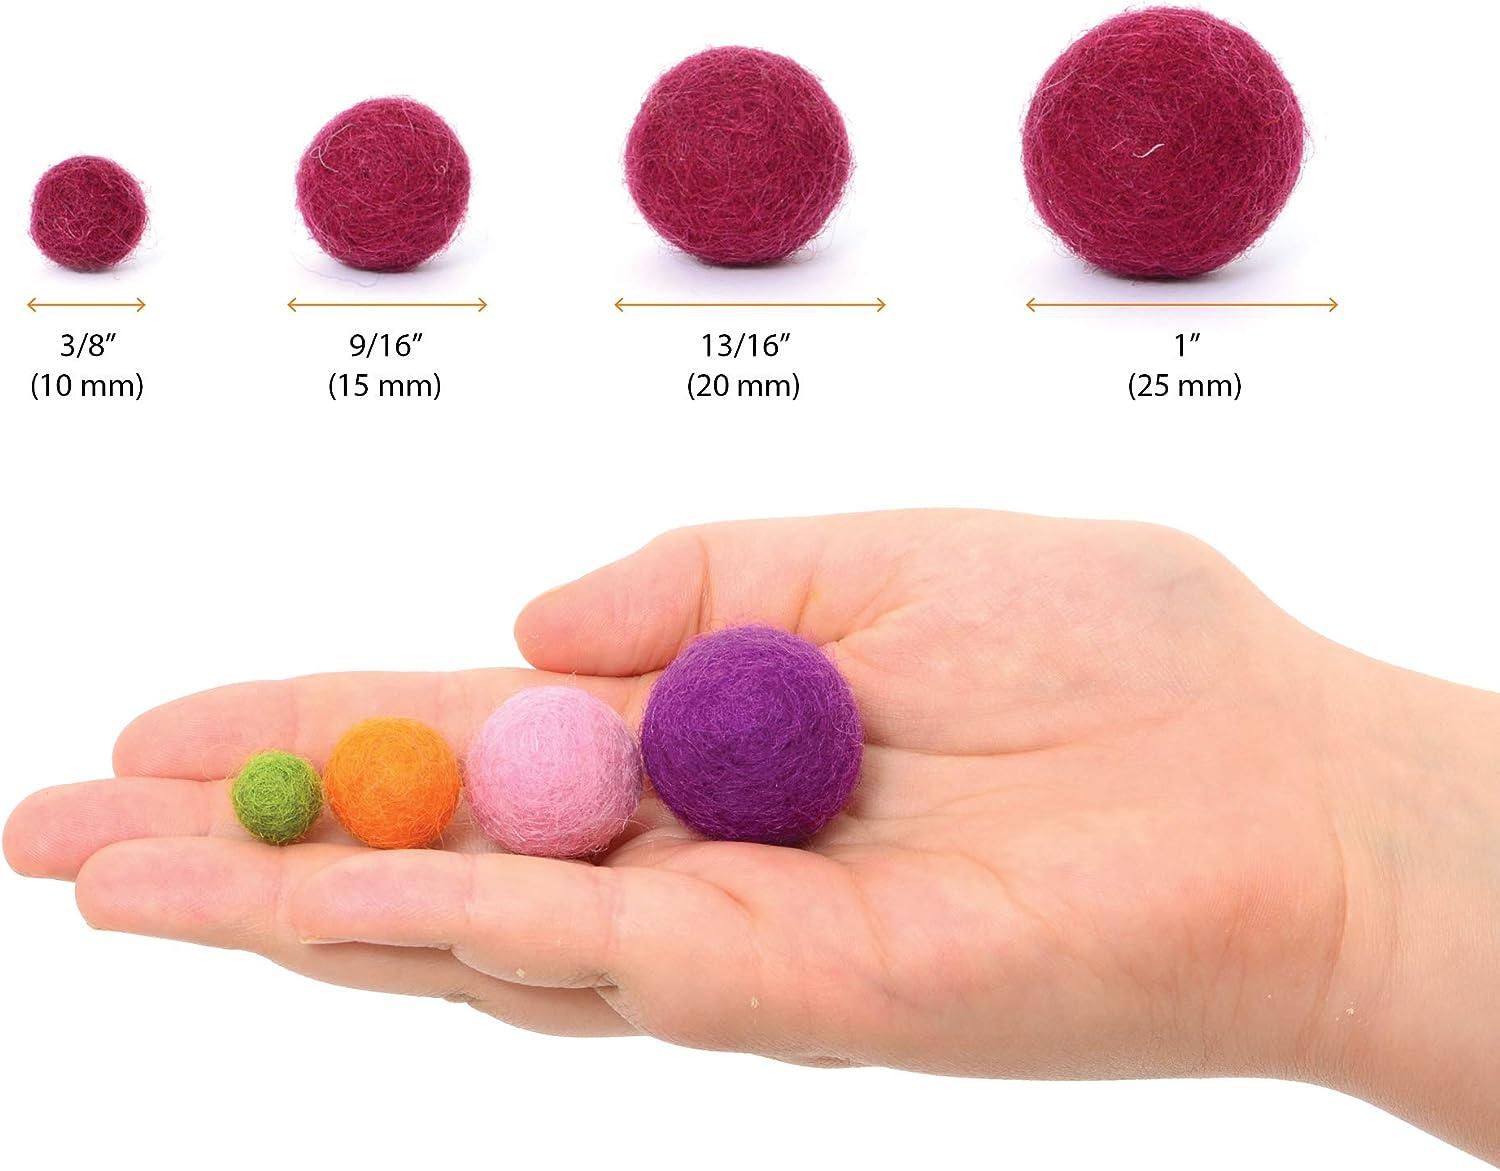 Glaciart One Felt Wool Balls, Felt Pom Poms (40 Pieces) 2.5 Centimeter - 1 inch, Handmade Felted Beige Colors- Bulk Small Puff for Felting and